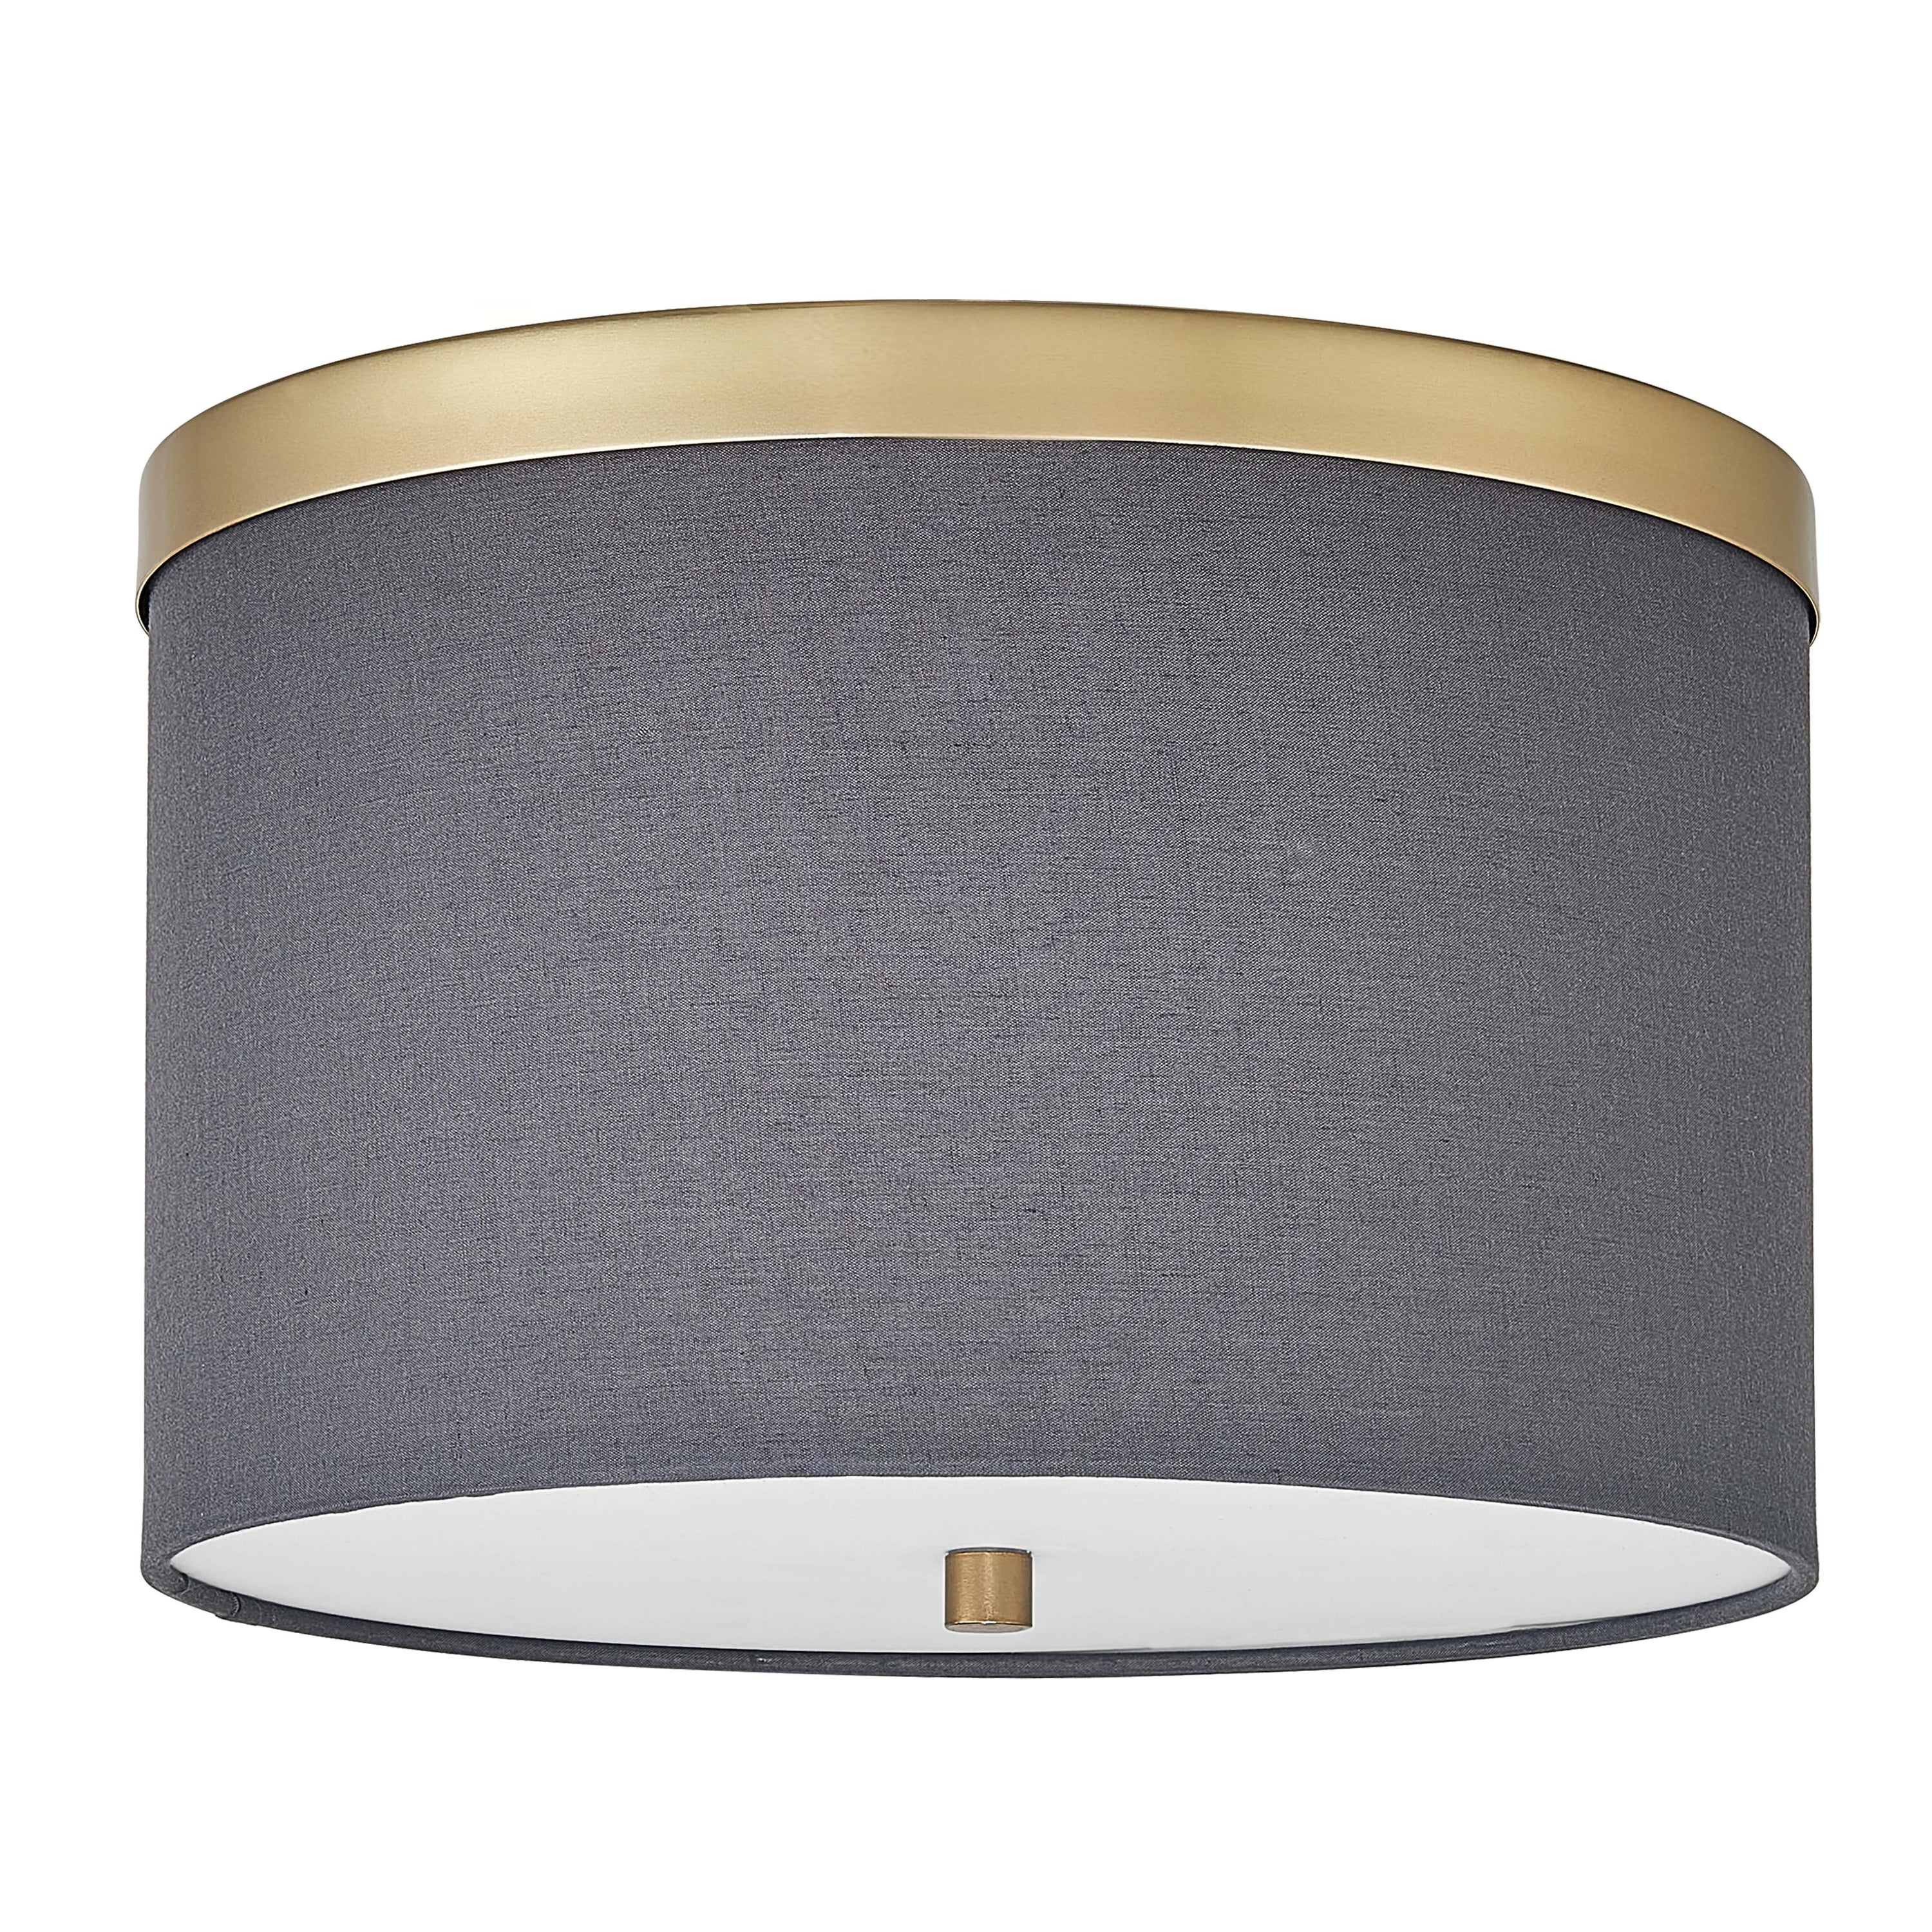 Dainolite FRD-122FH-AGB-GRY 2 Light Incandescent Flush Mount Aged Brass with Grey Shade